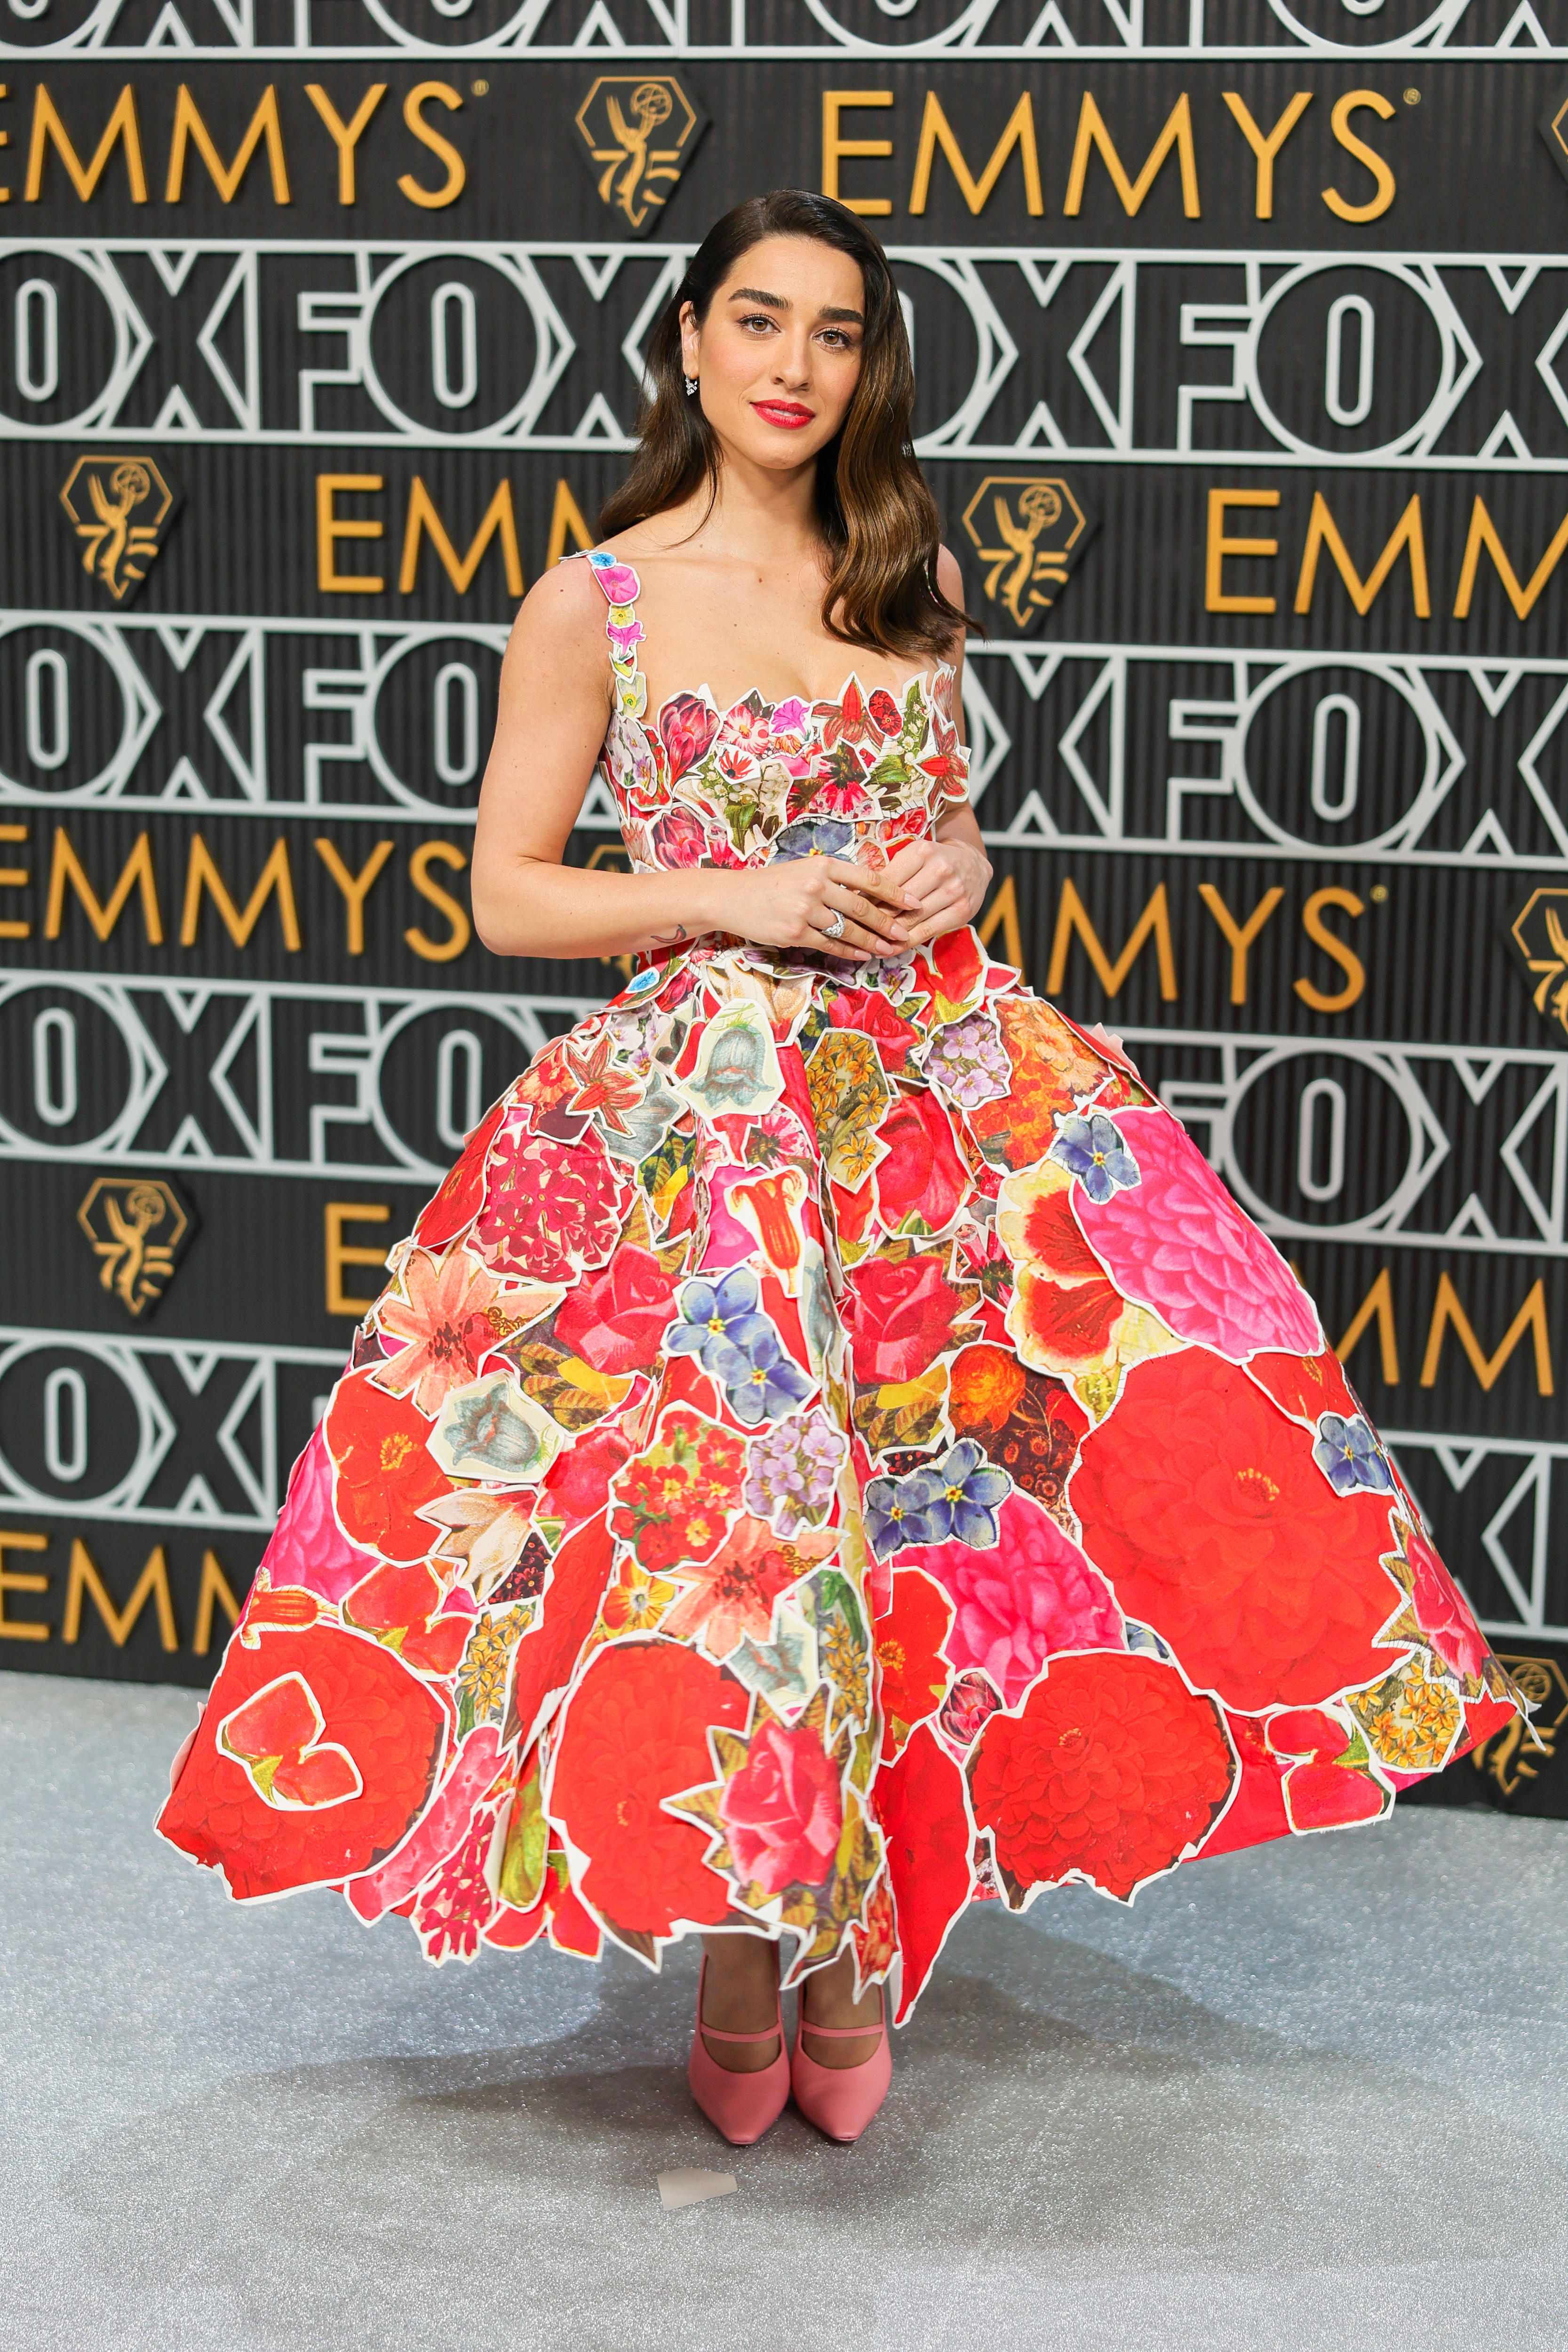 A woman in a floral dress on the red carpet